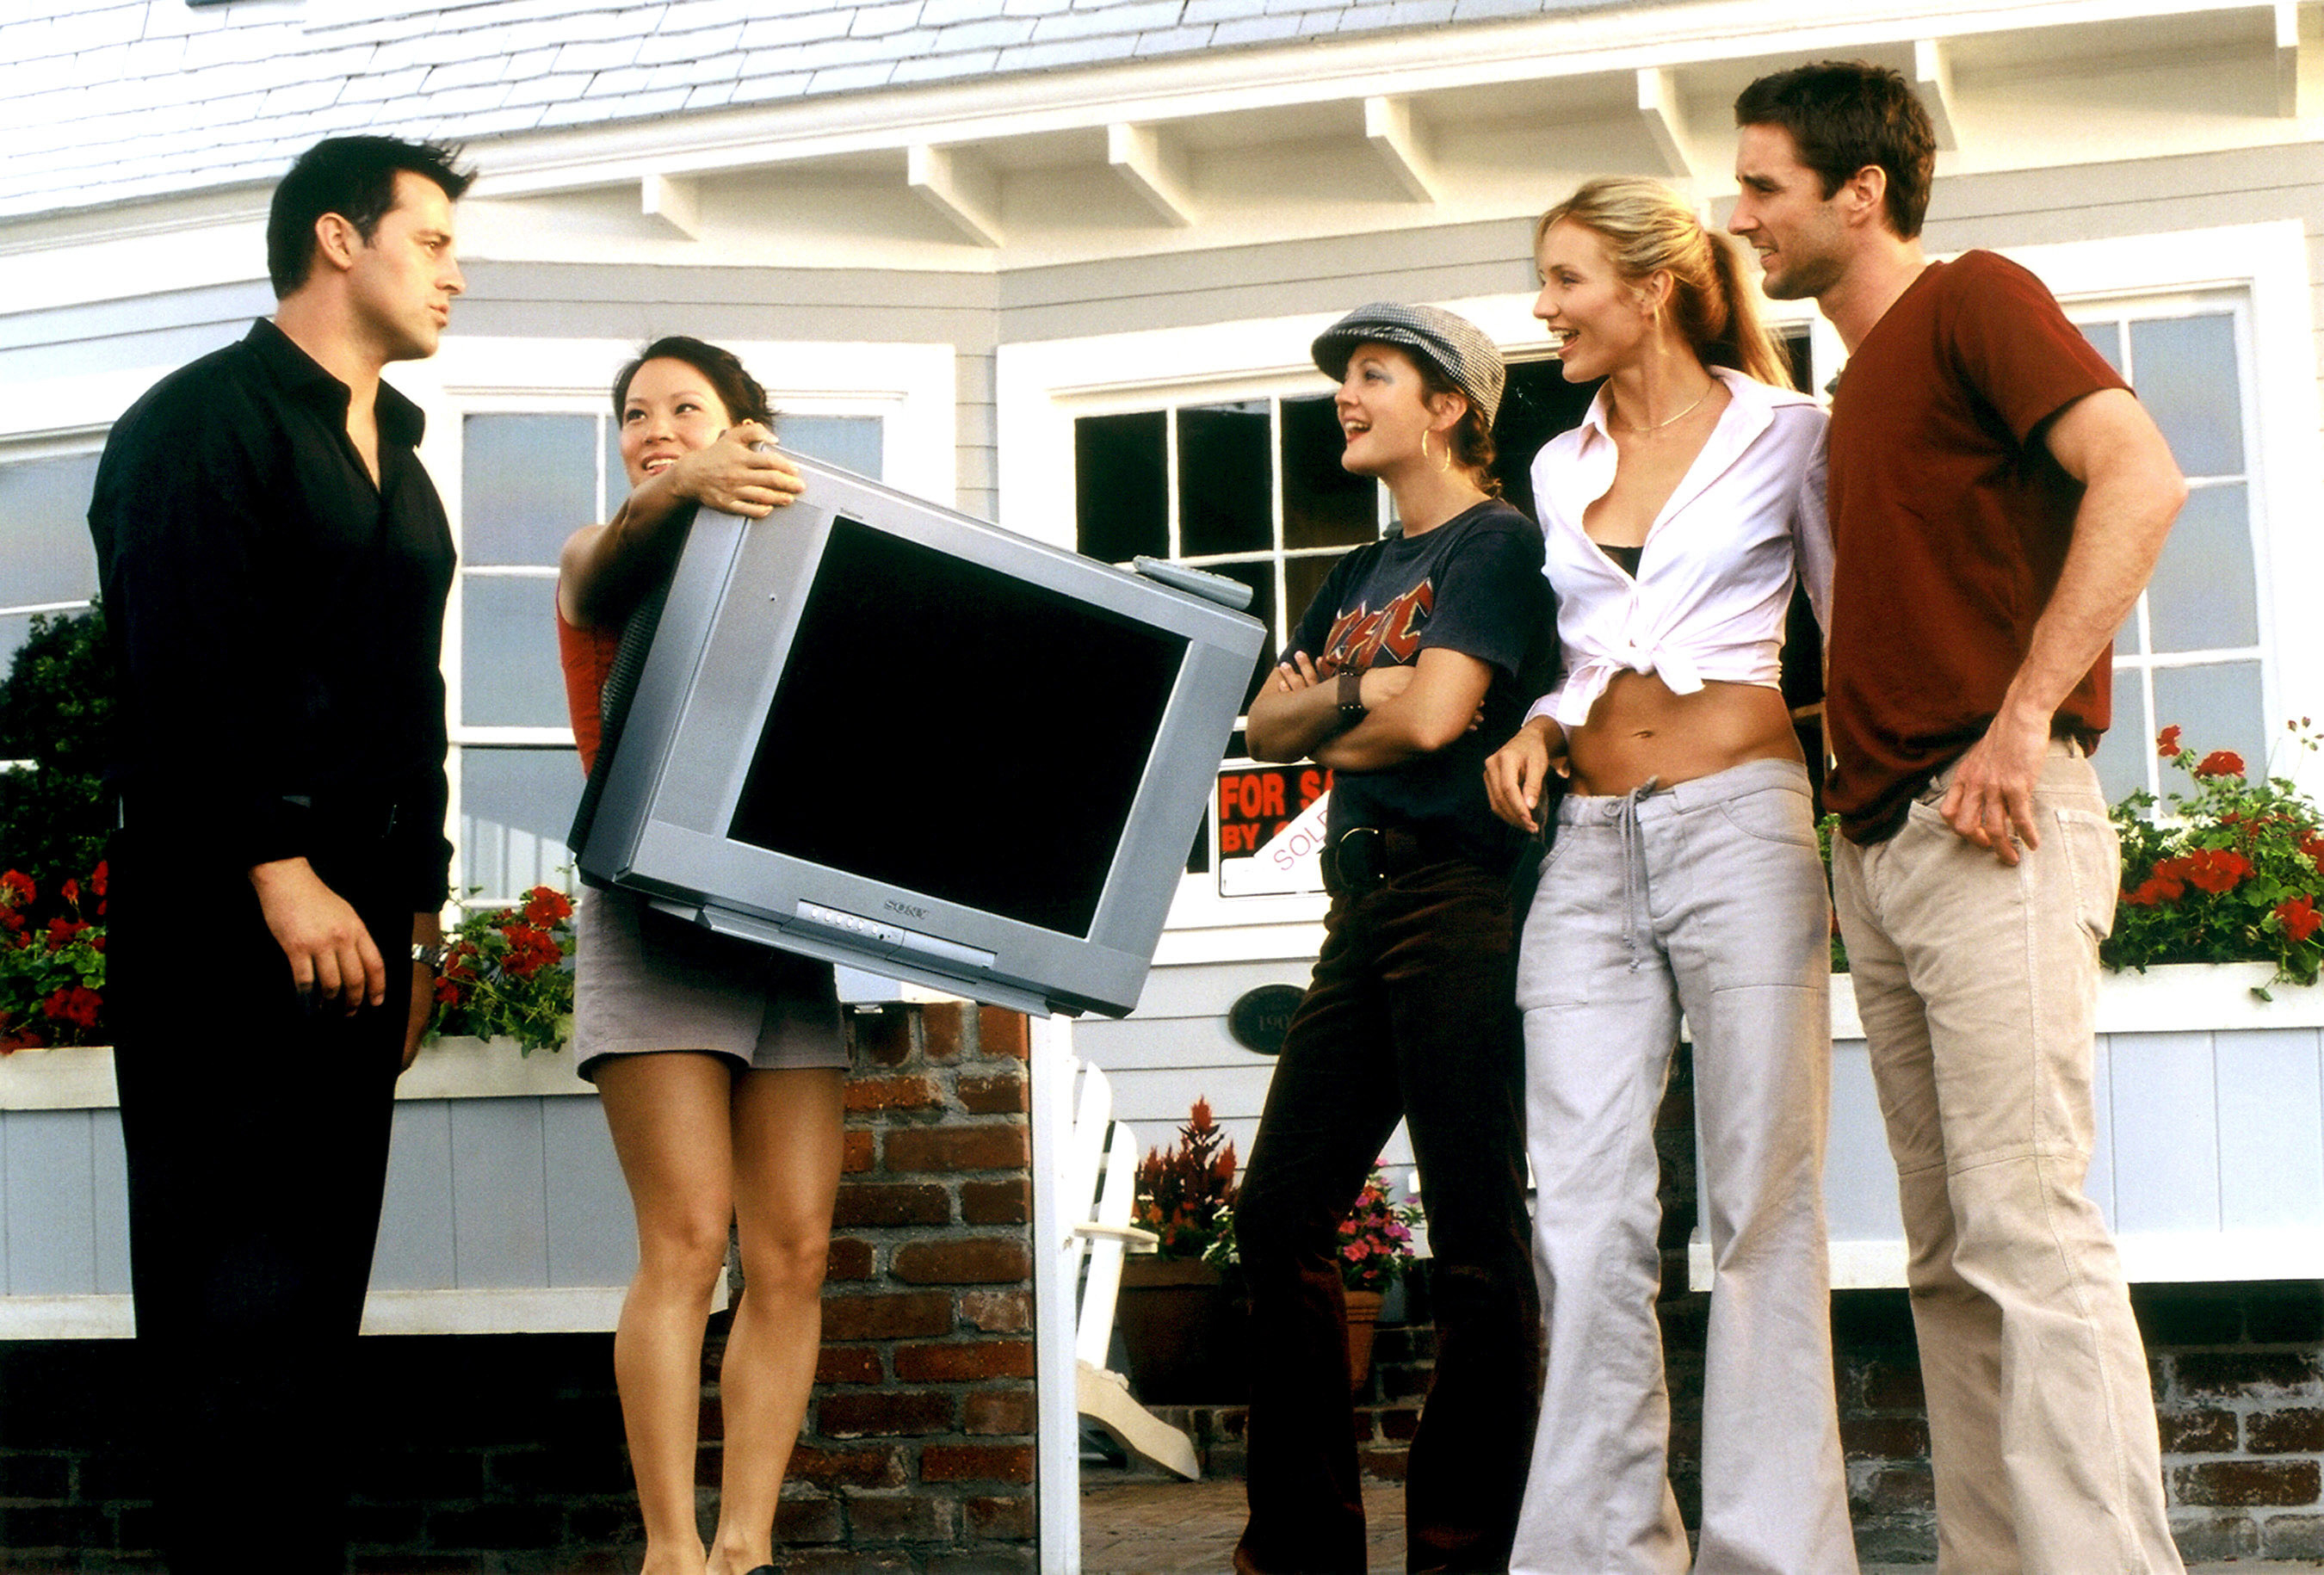 Lucy Liu carries a TV next to Matt LeBlanc while Barrymore, Cameron Diaz, and Wilson stand by